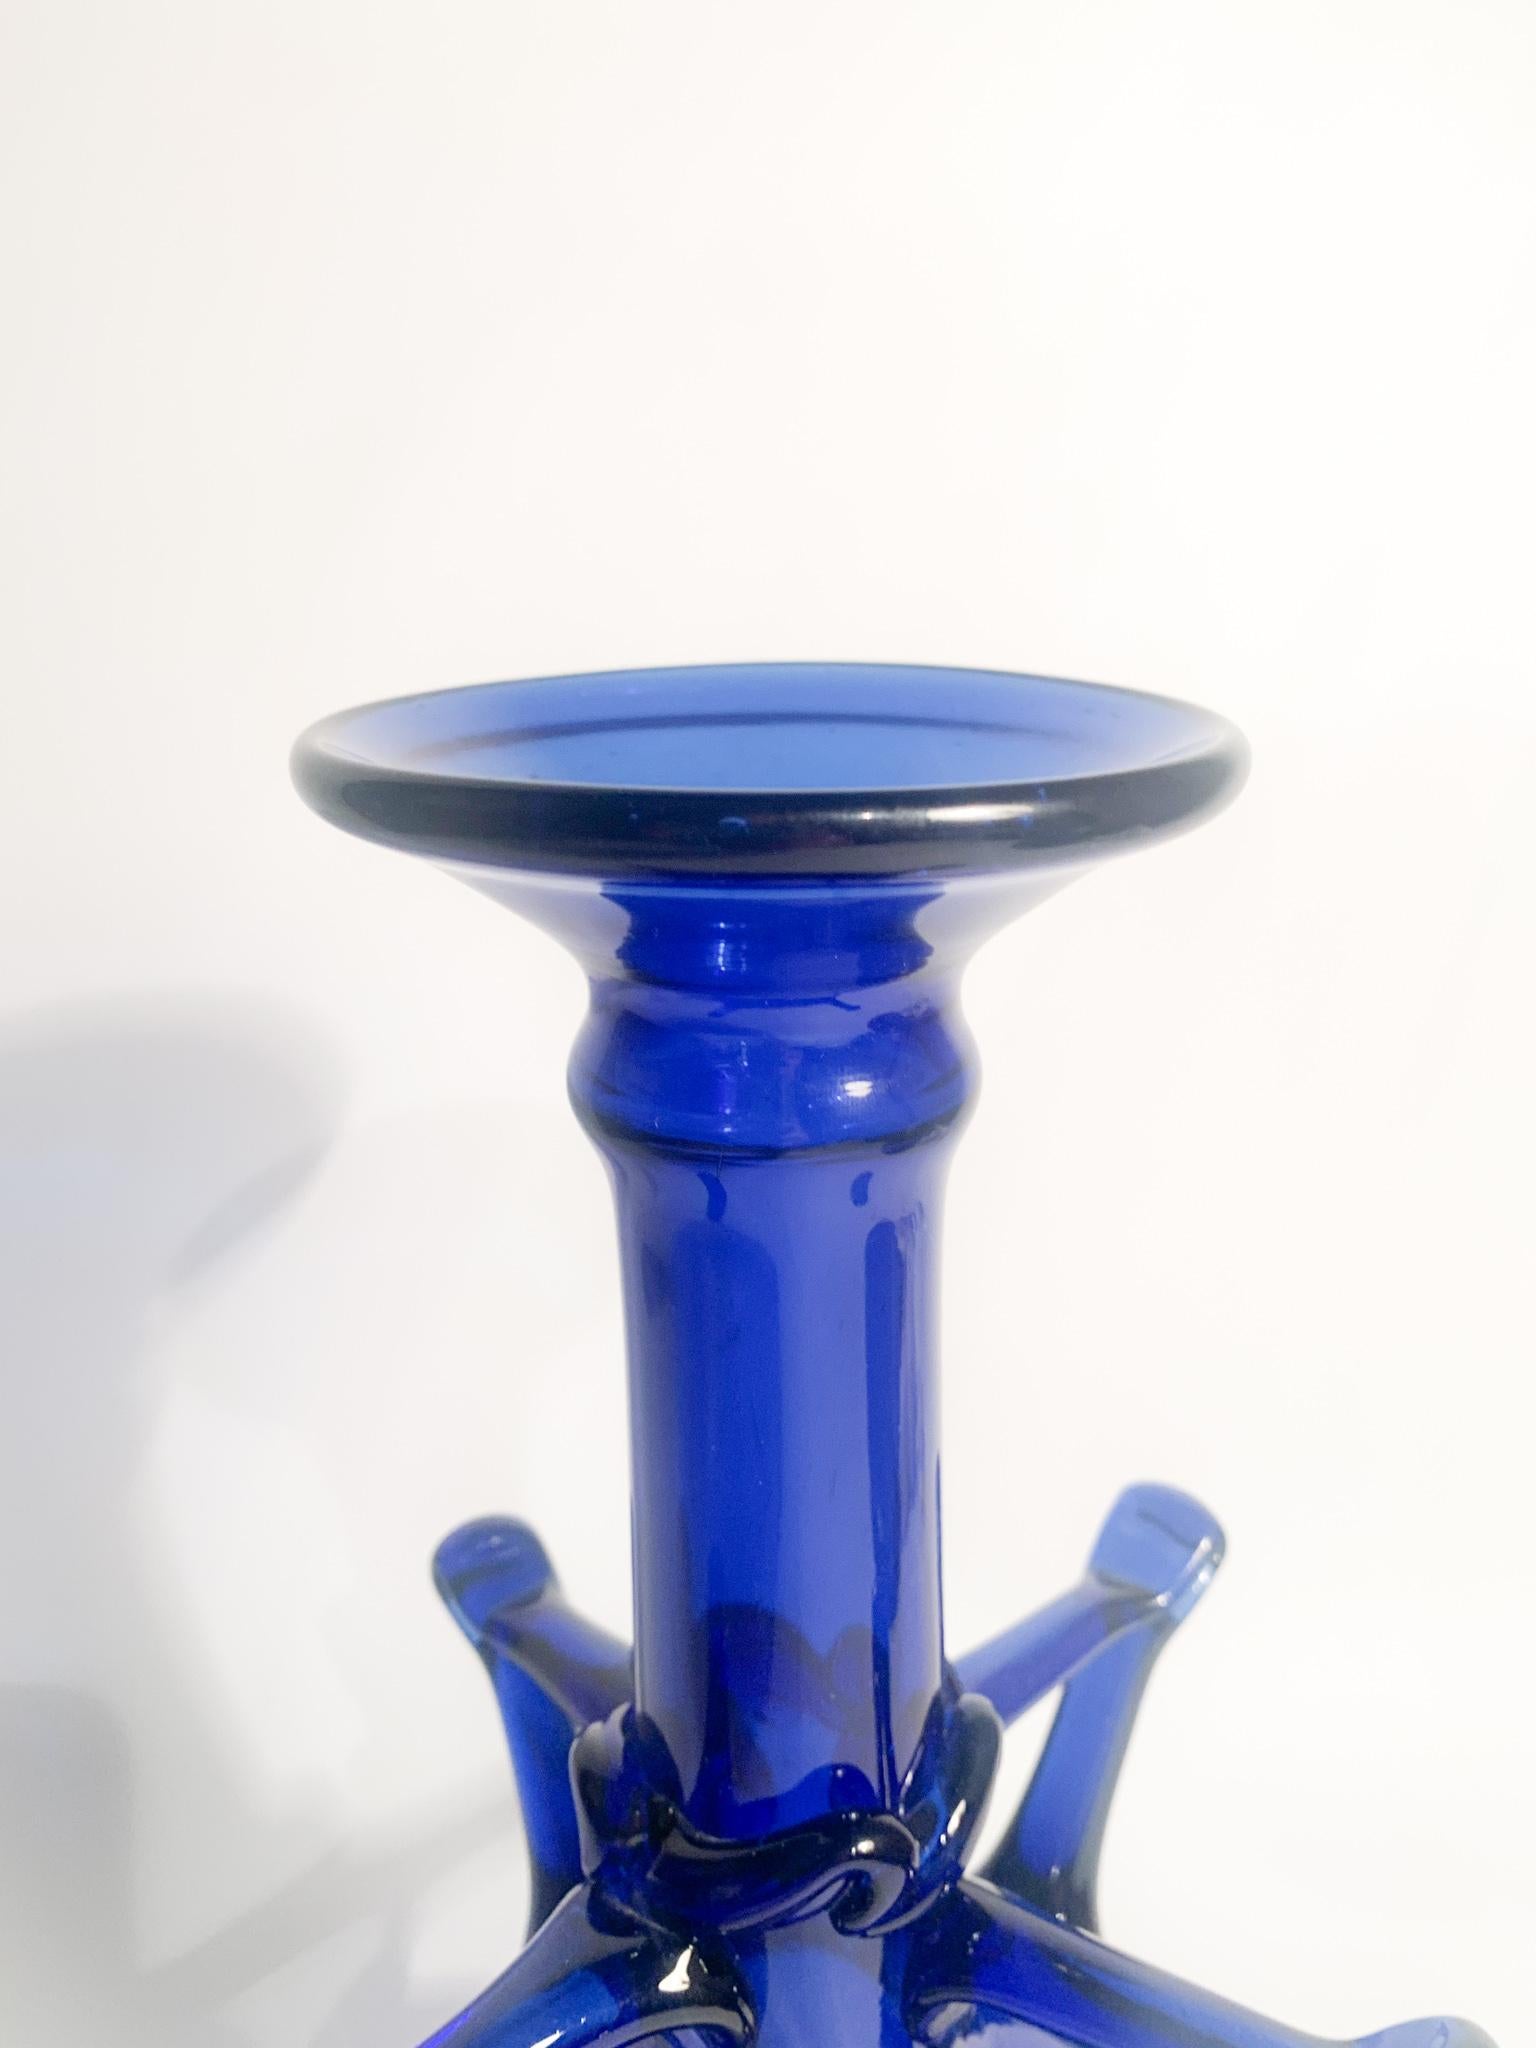 Mid-Century Modern Italian Blue Murano Glass Vase Attributed to Fratelli Toso, 1940s For Sale